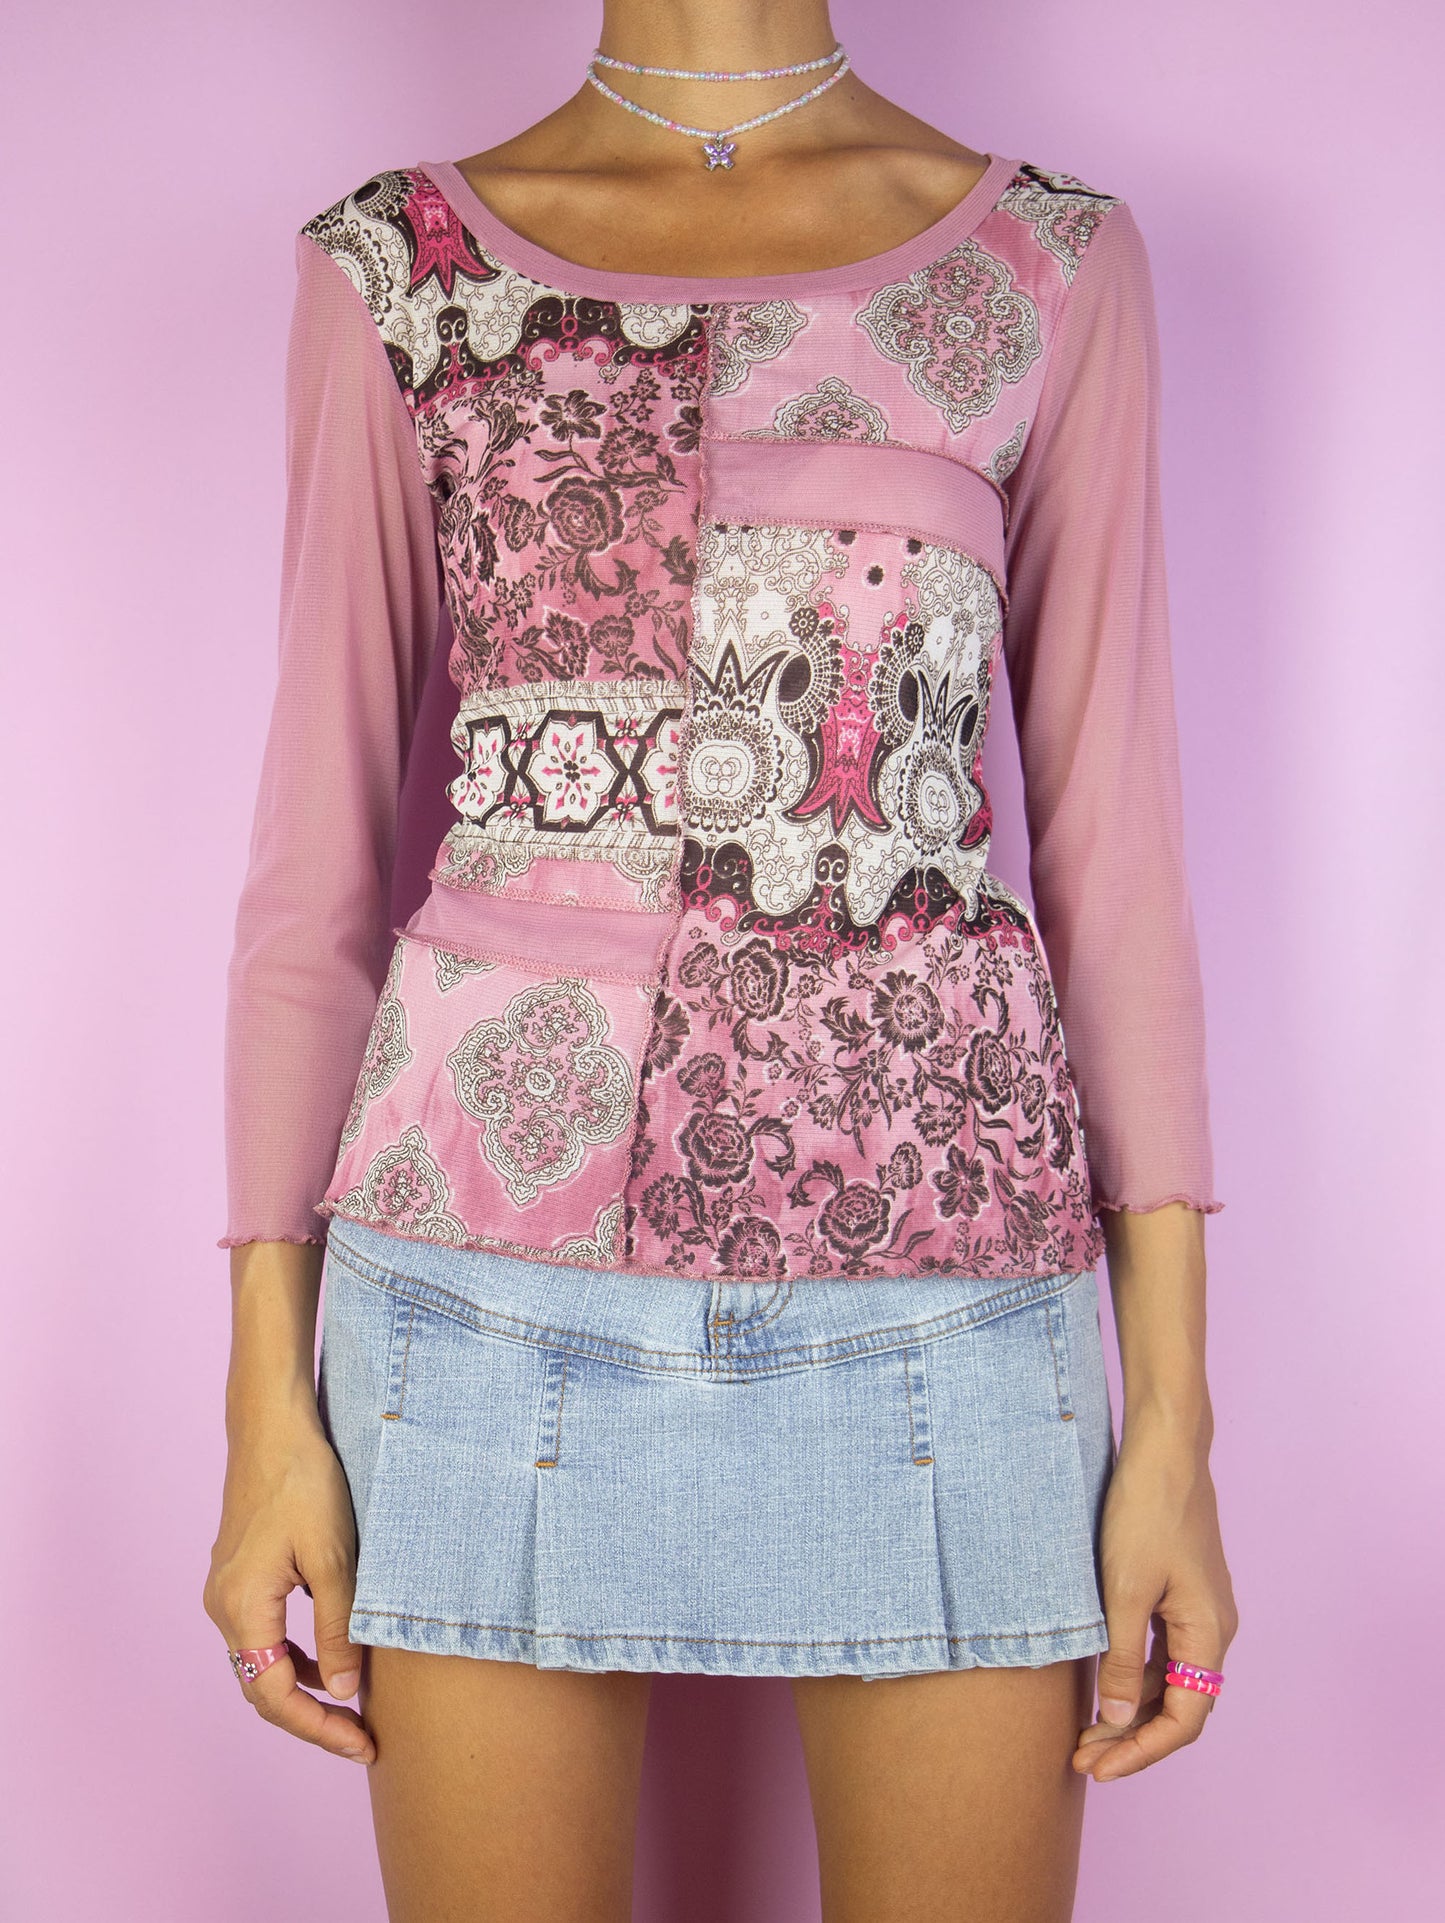 The Vintage Y2K Pink Abstract Mesh Top is a semi-sheer mesh lettuce hem multicolored pink paisley floral abstract print three-quarter sleeve t-shirt. Super cute cyber fairy grunge gorpcore shirt circa 2000's.